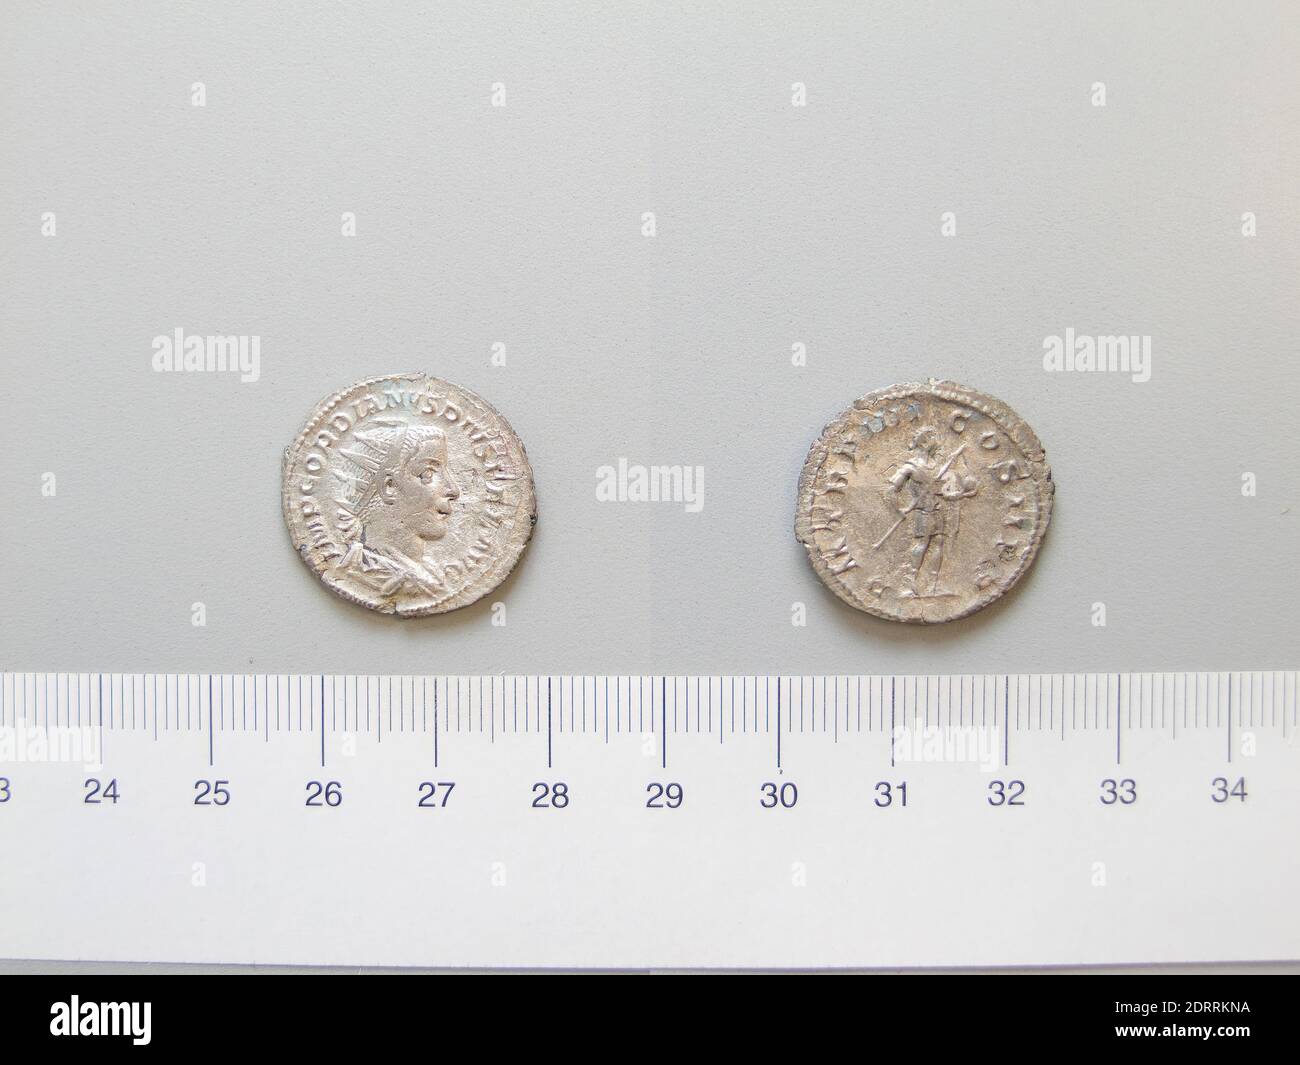 Ruler: Gordian III, Emperor of Rome, 225–244, ruled 238–44, Mint: Rome, Antoninianus of Gordian III, Emperor of Rome from Rome, 241, Silver, 1.87 g, 6:00, 22.7 mm, Made in Rome, Italy, Roman, 3rd century, Numismatics Stock Photo